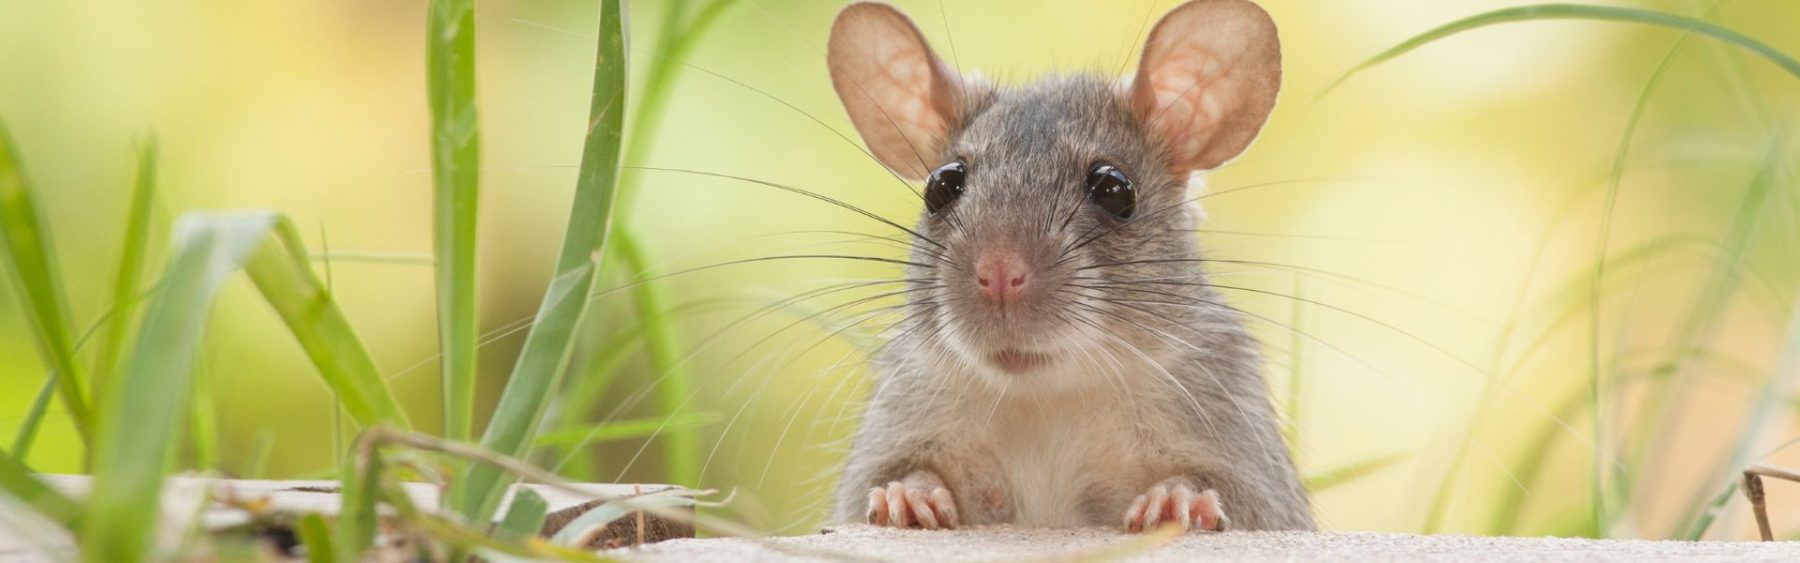 Even though their small size, a small rodent can wreck havoc in a house gnawing electric cords, and even cheweing through drywall.